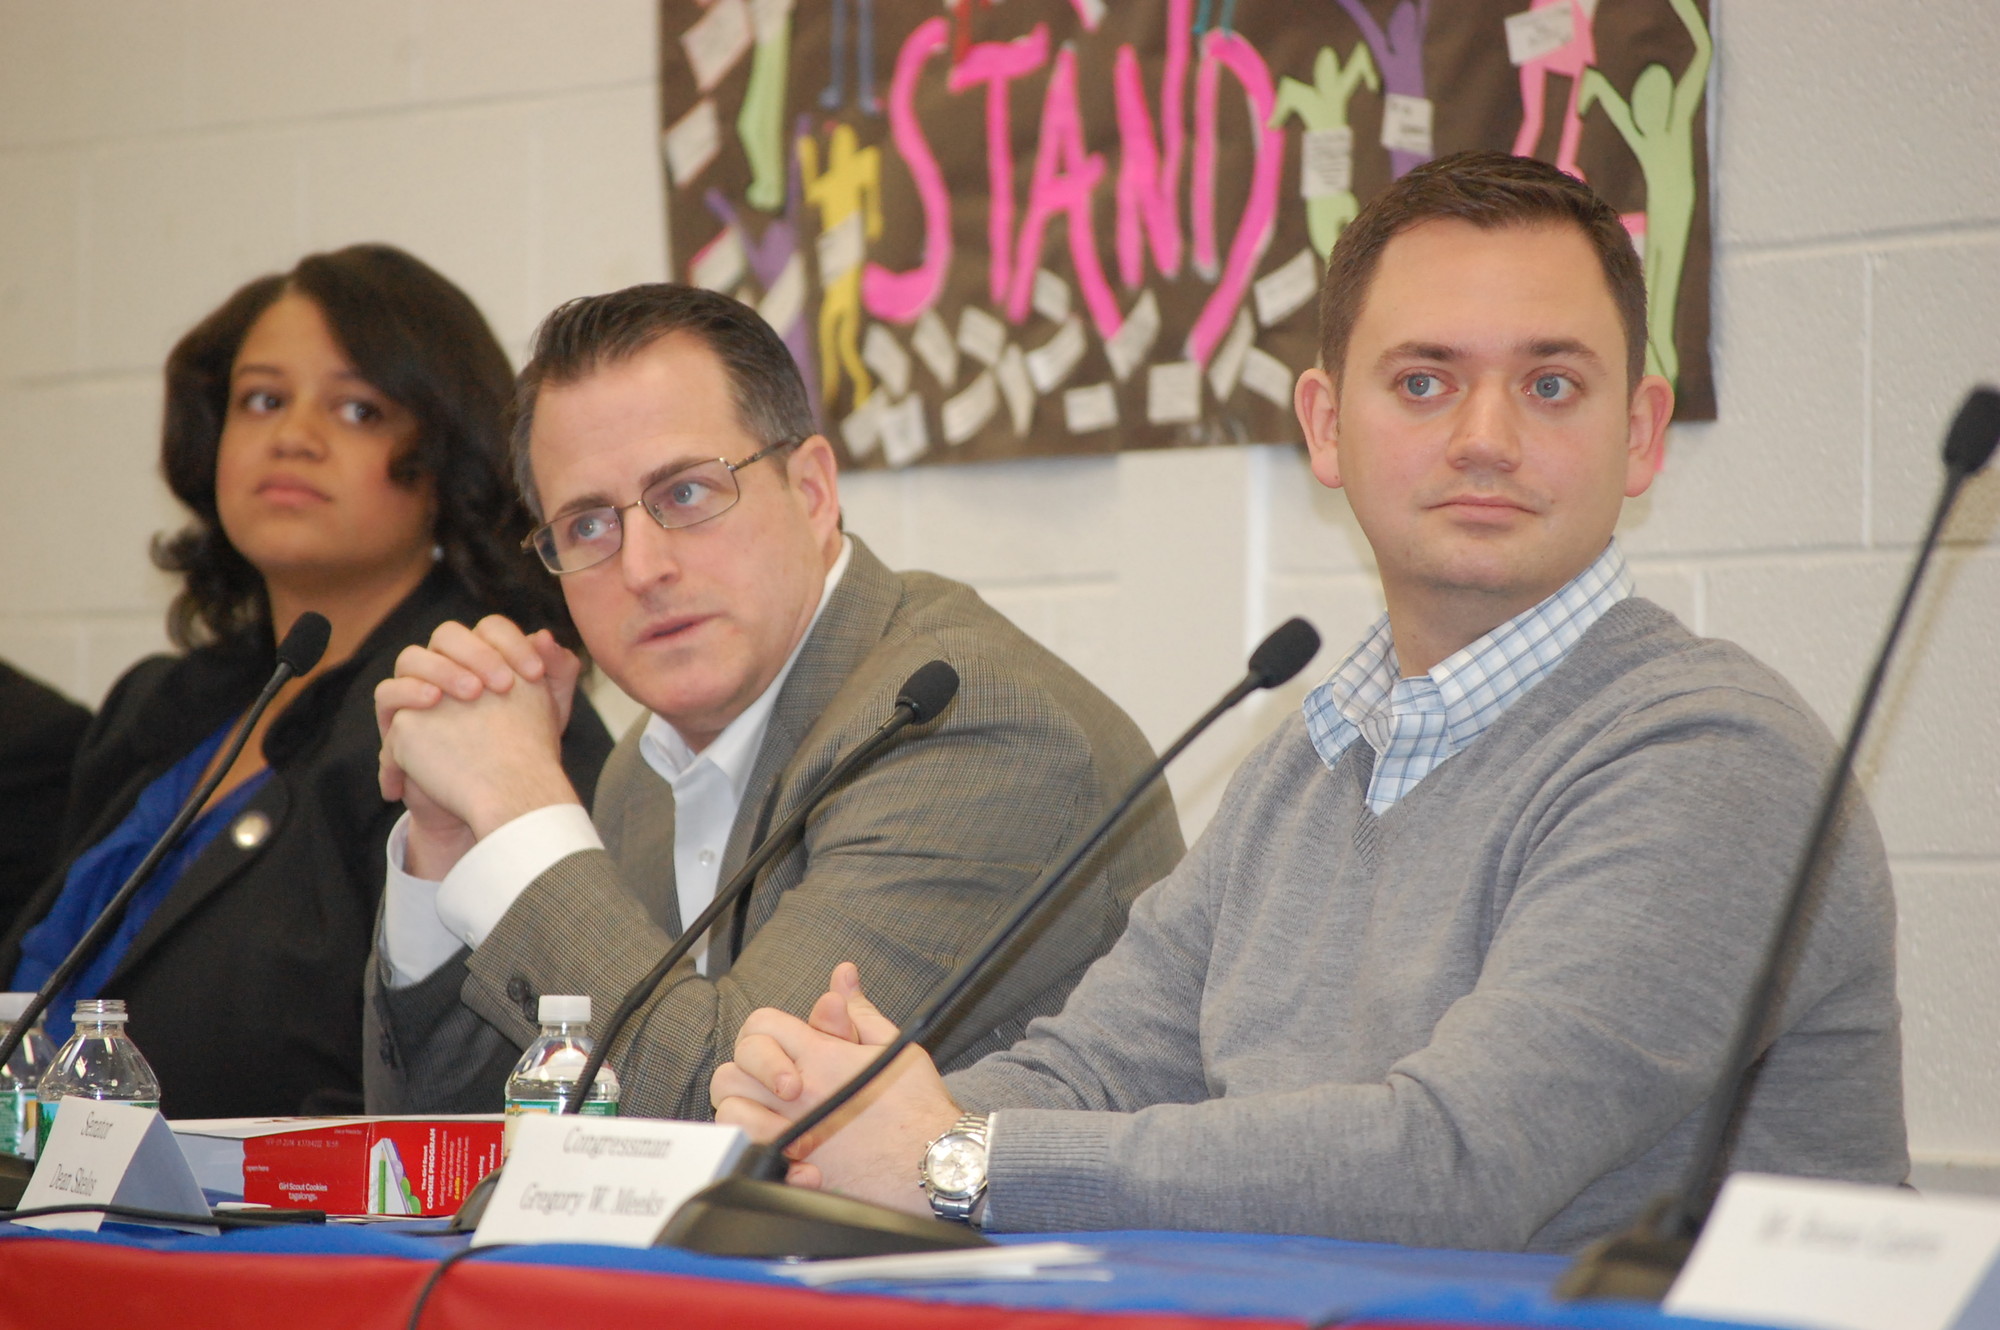 Assemblywoman Michaelle Solages, Assemblyman Brian Curran and Sen. Dean Skelos chief of staff Tom LoCascio were on the dais last Saturday.